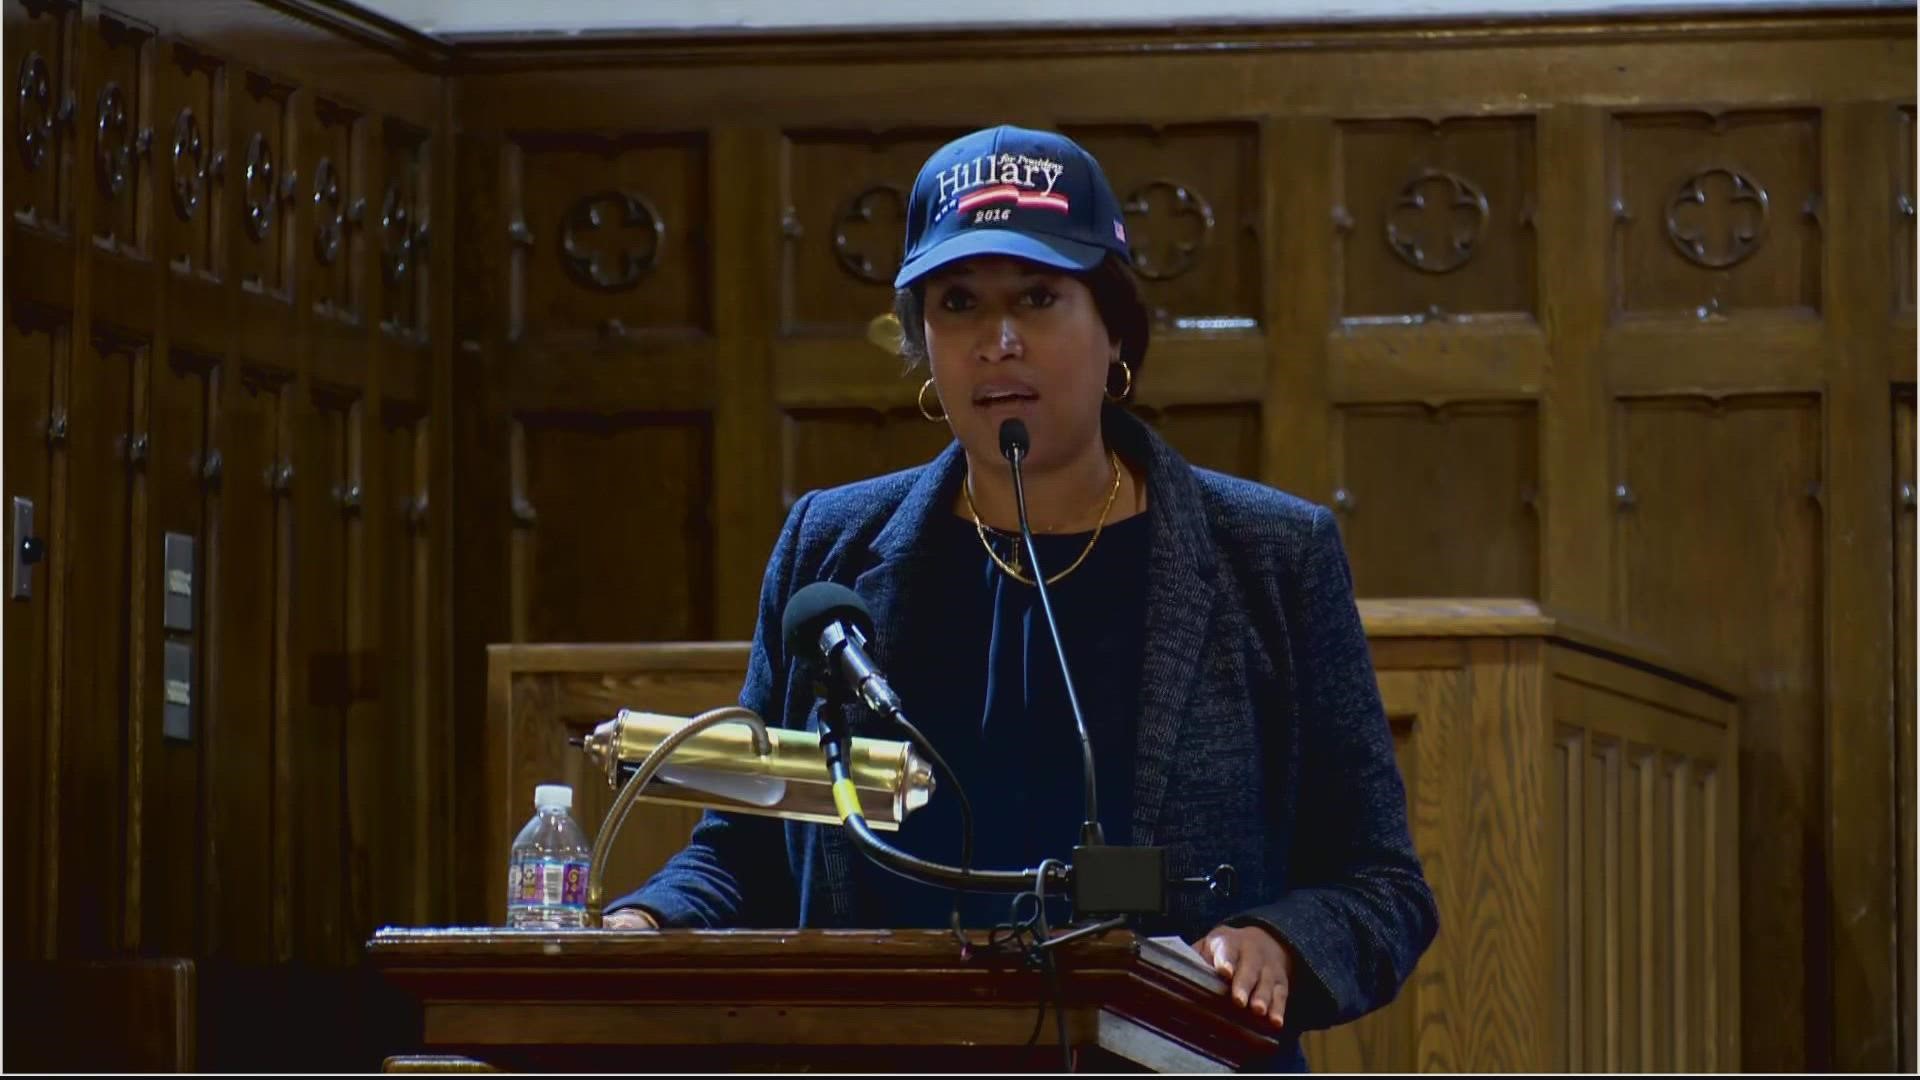 Washington DC Mayor Muriel Bowser gave remarks Saturday at the Asbury United Methodist Church for the Housing and Economic Justice for All Rally.